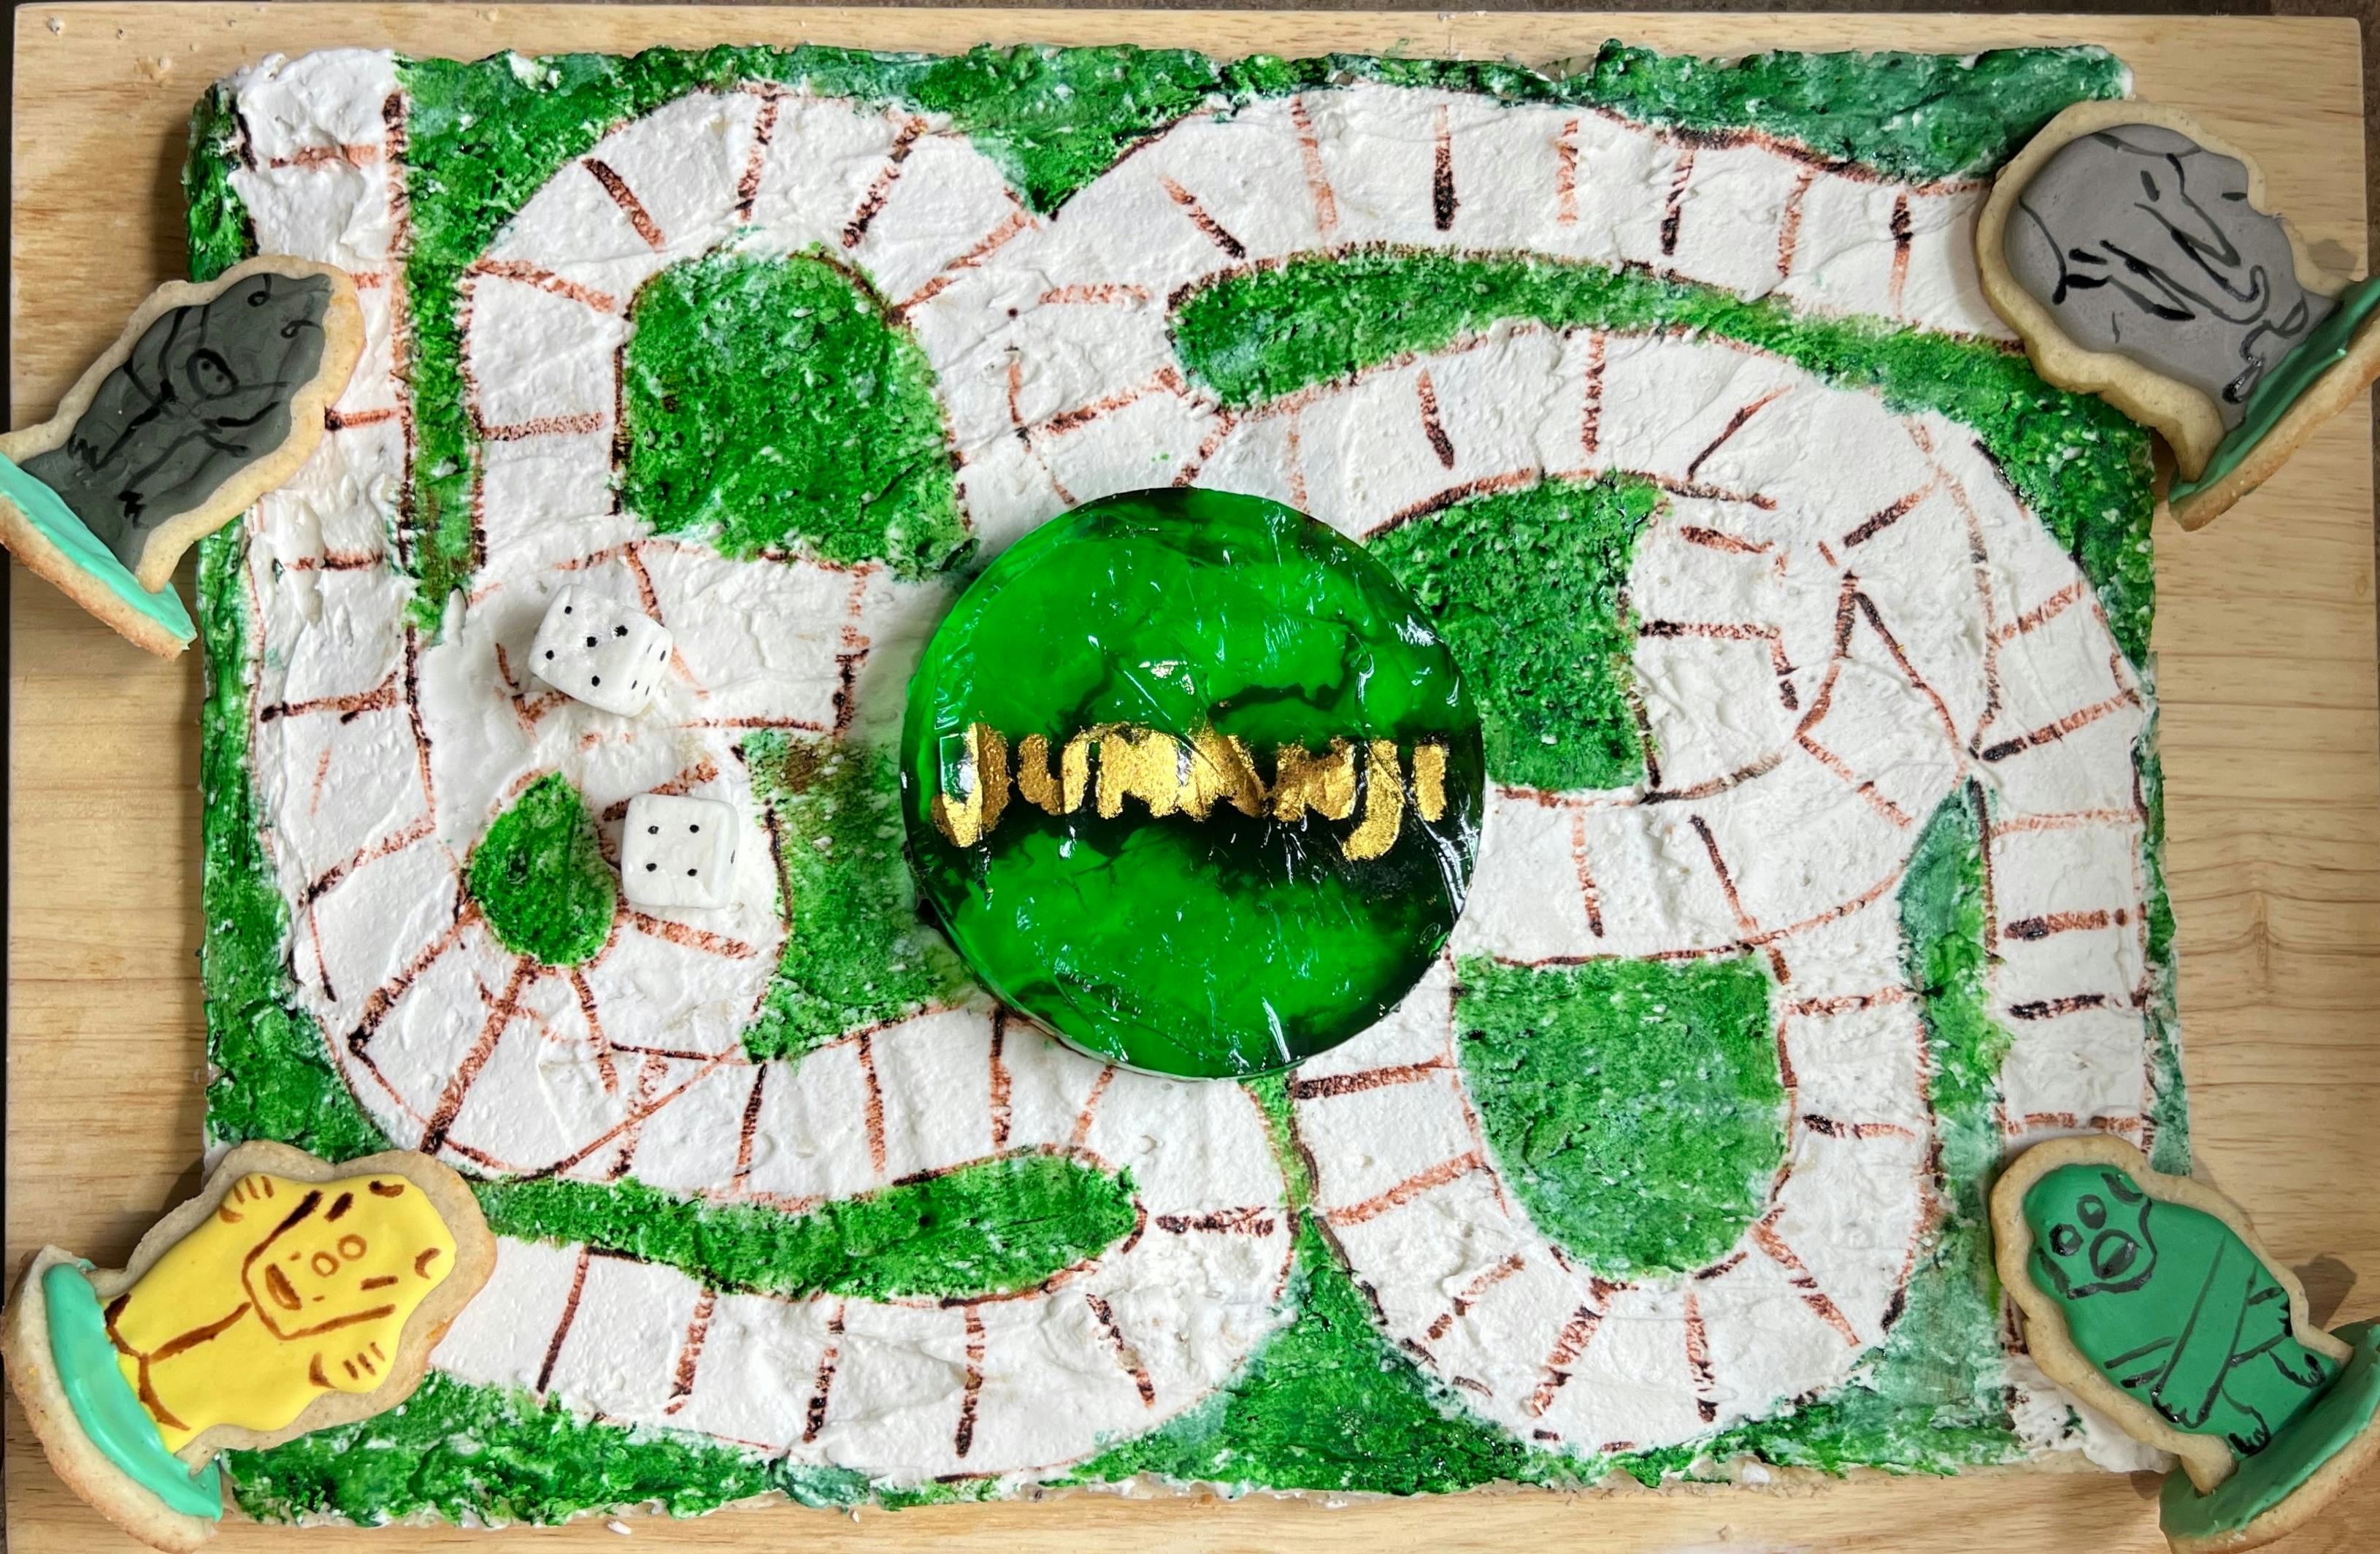 A bird's eye picture of a Jumanji board game, complete with pieces and dice, made of cookies